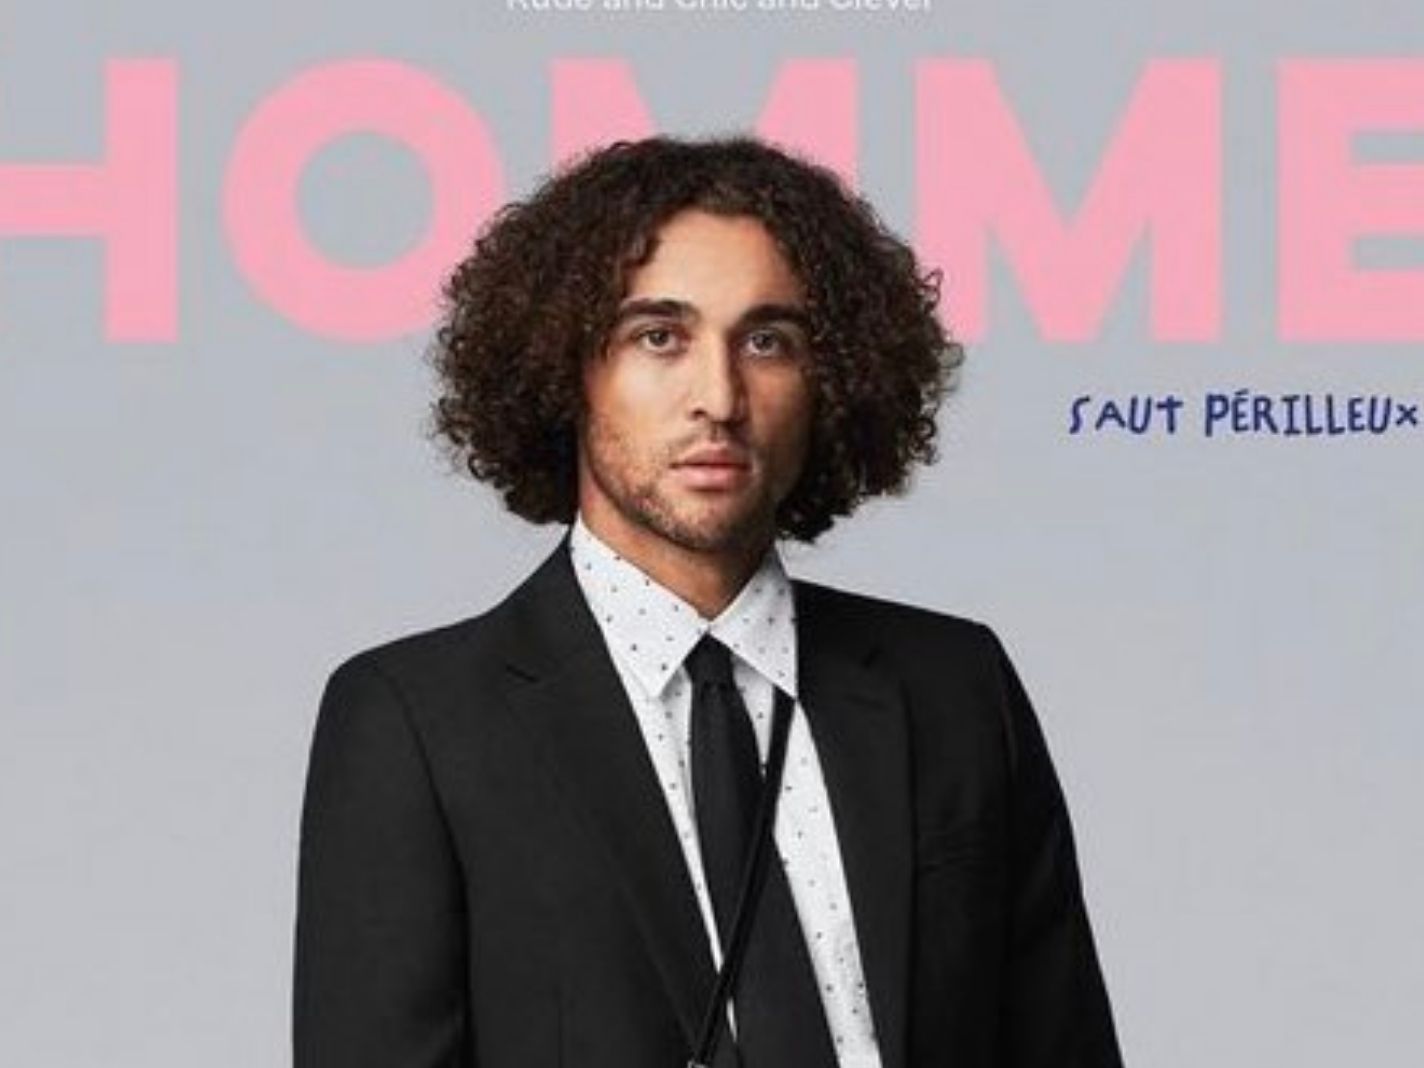 Dominic Calvert-Lewin on the cover of Homme+ magazine